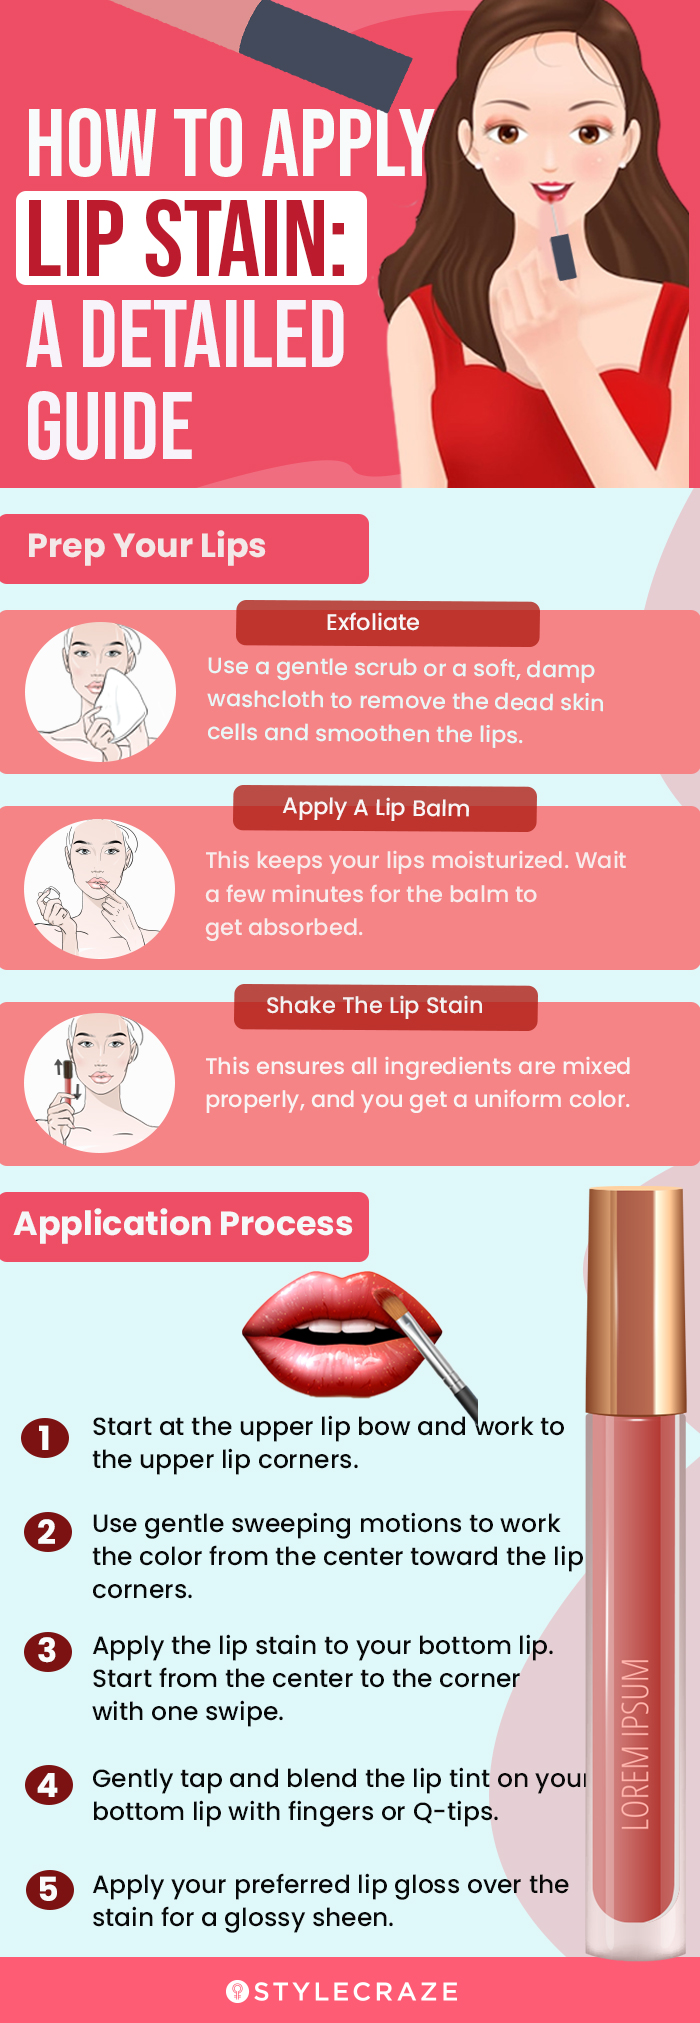 how to apply lip stain a detailed guide (infographic)